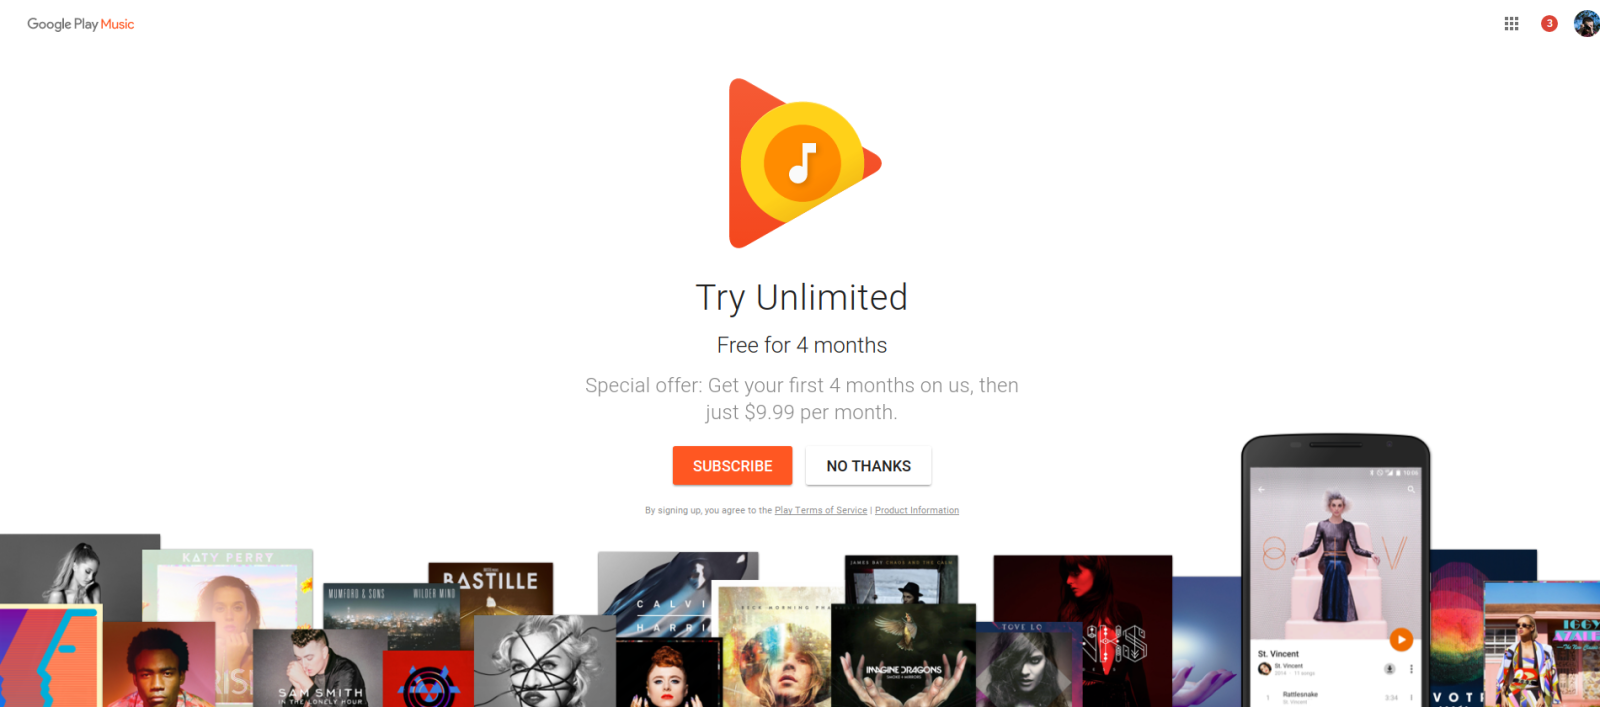 Google Now Offering 4 Month Free Trial For Google Play Music